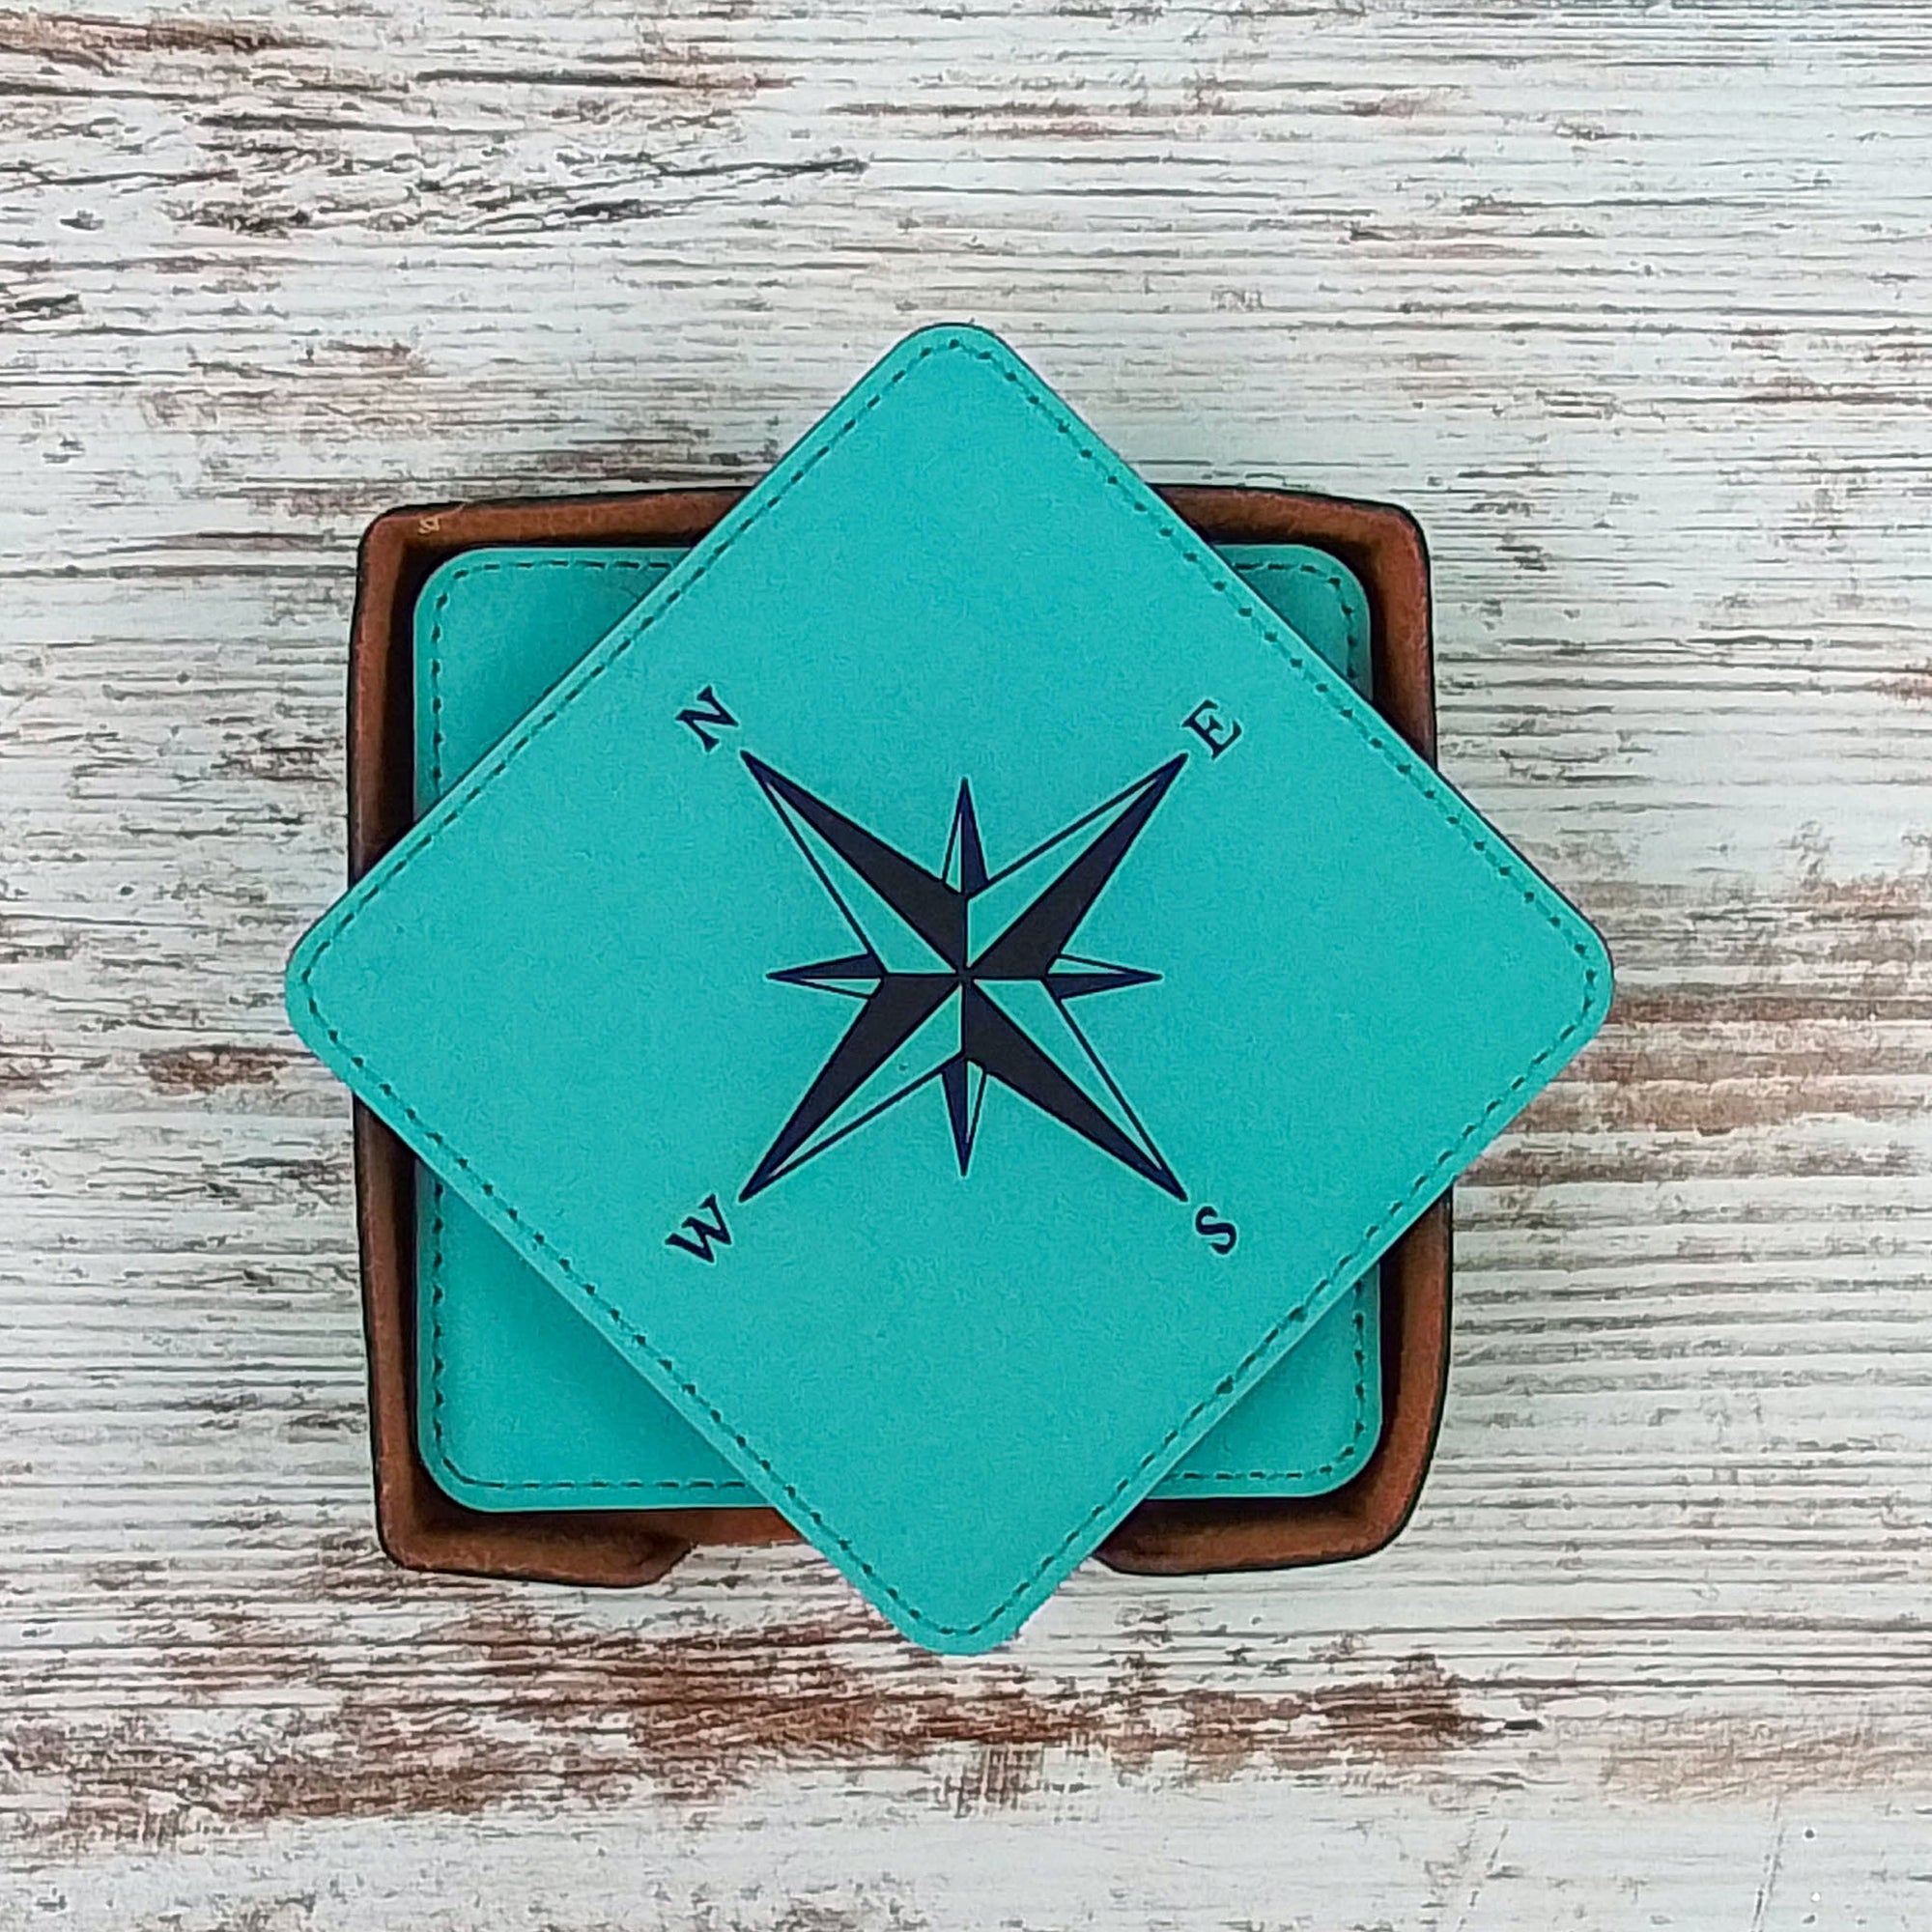 Nautical Compass Coasters, Sailing Gifts, Boating Coaster, Boat Coaster, Barware Coasters, Barroom, Set of 6 With Holder vrs 2